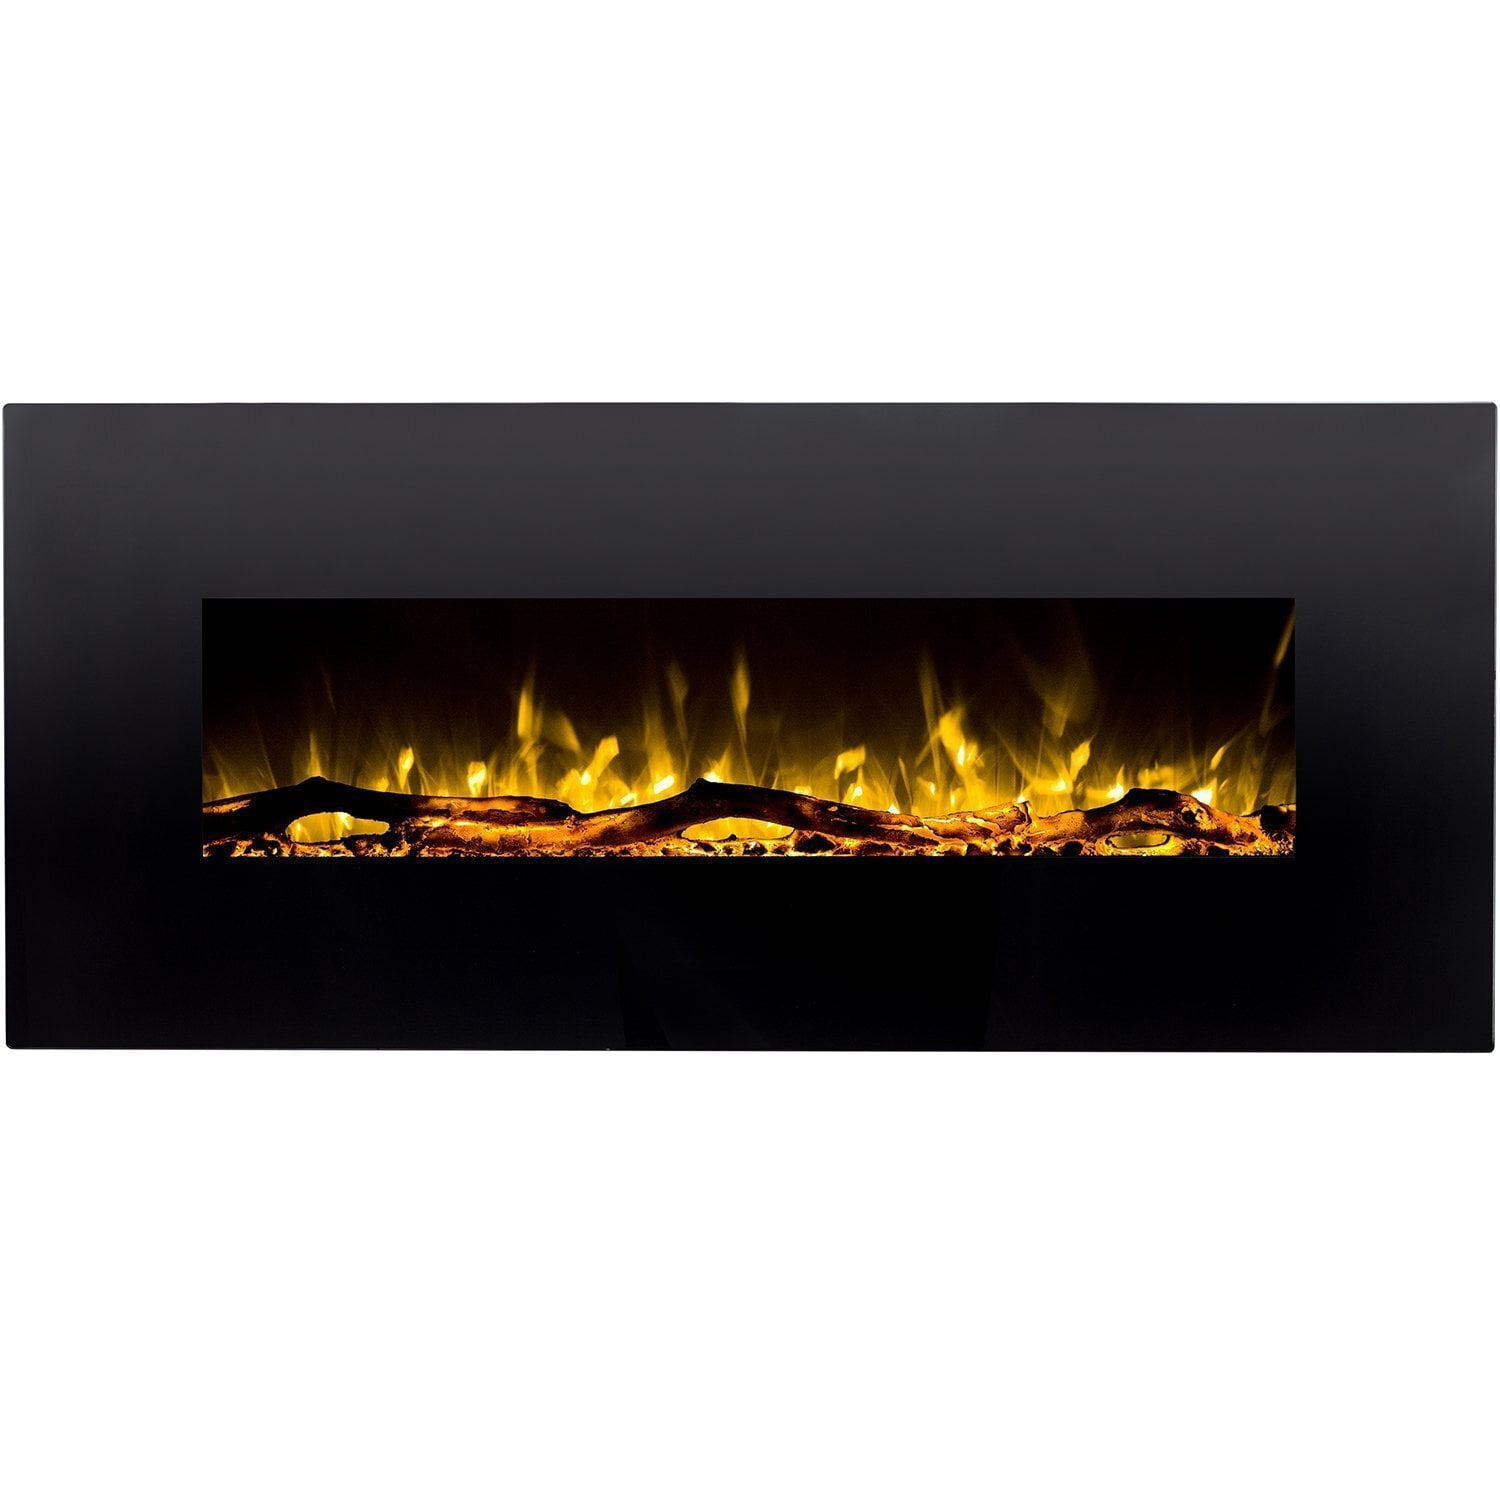 Regal Flame Denali Black 60 Log, Pebble, Crystal, 3 Color Heater Electric Wall Mounted Fireplace Better Than Wood Fireplaces, Ga